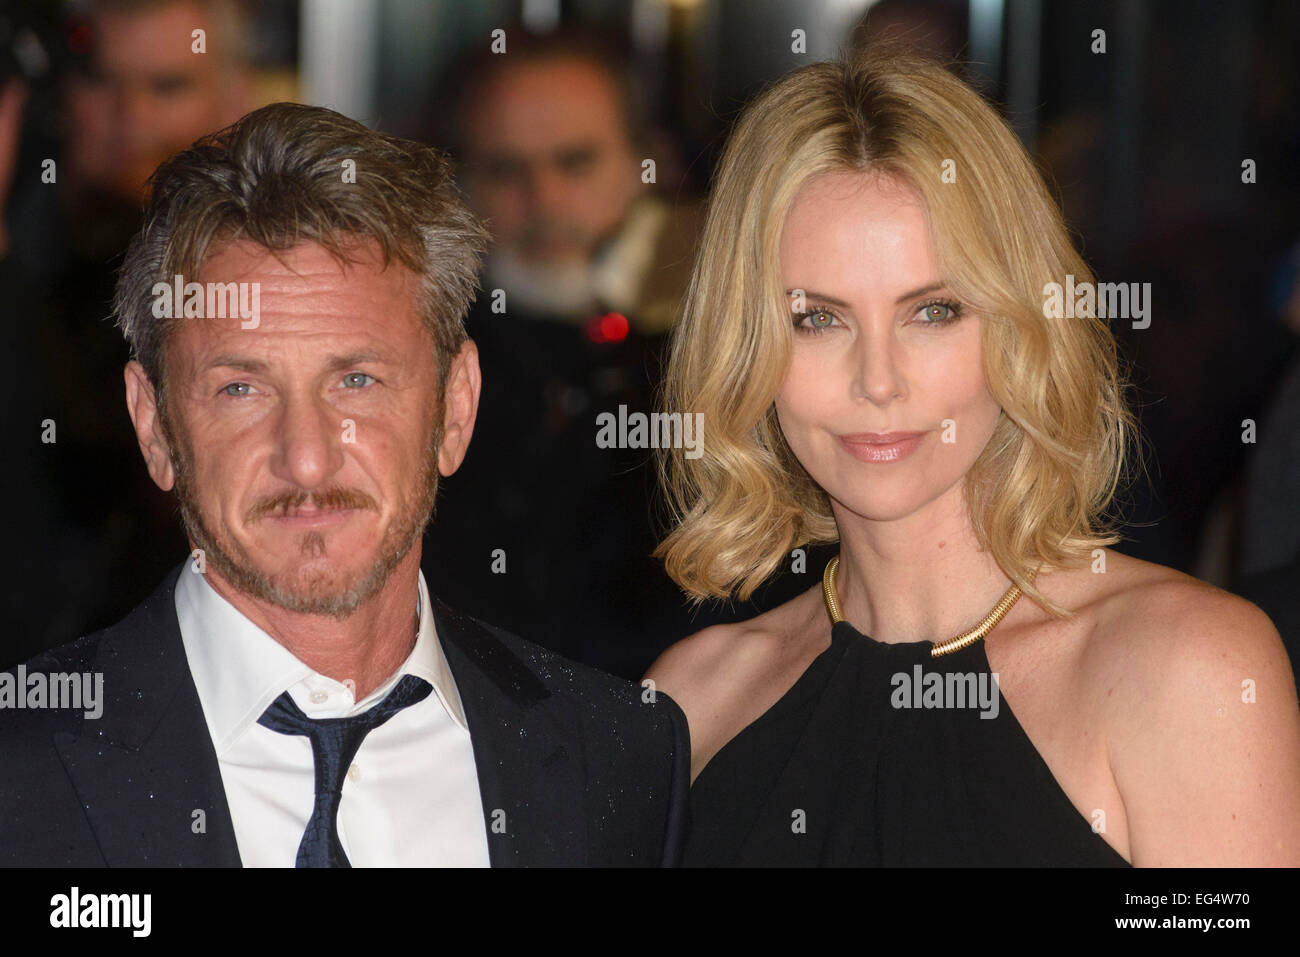 London, UK. 16th Feb, 2015. Sean Penn and Charlize Theron attends the World Premiere of THE GUNMAN on 16/02/2015 at BFI South Bank, London. Sean Penn, Charlize Theron. Picture by Julie Edwards Credit:  Julie Edwards/Alamy Live News Stock Photo